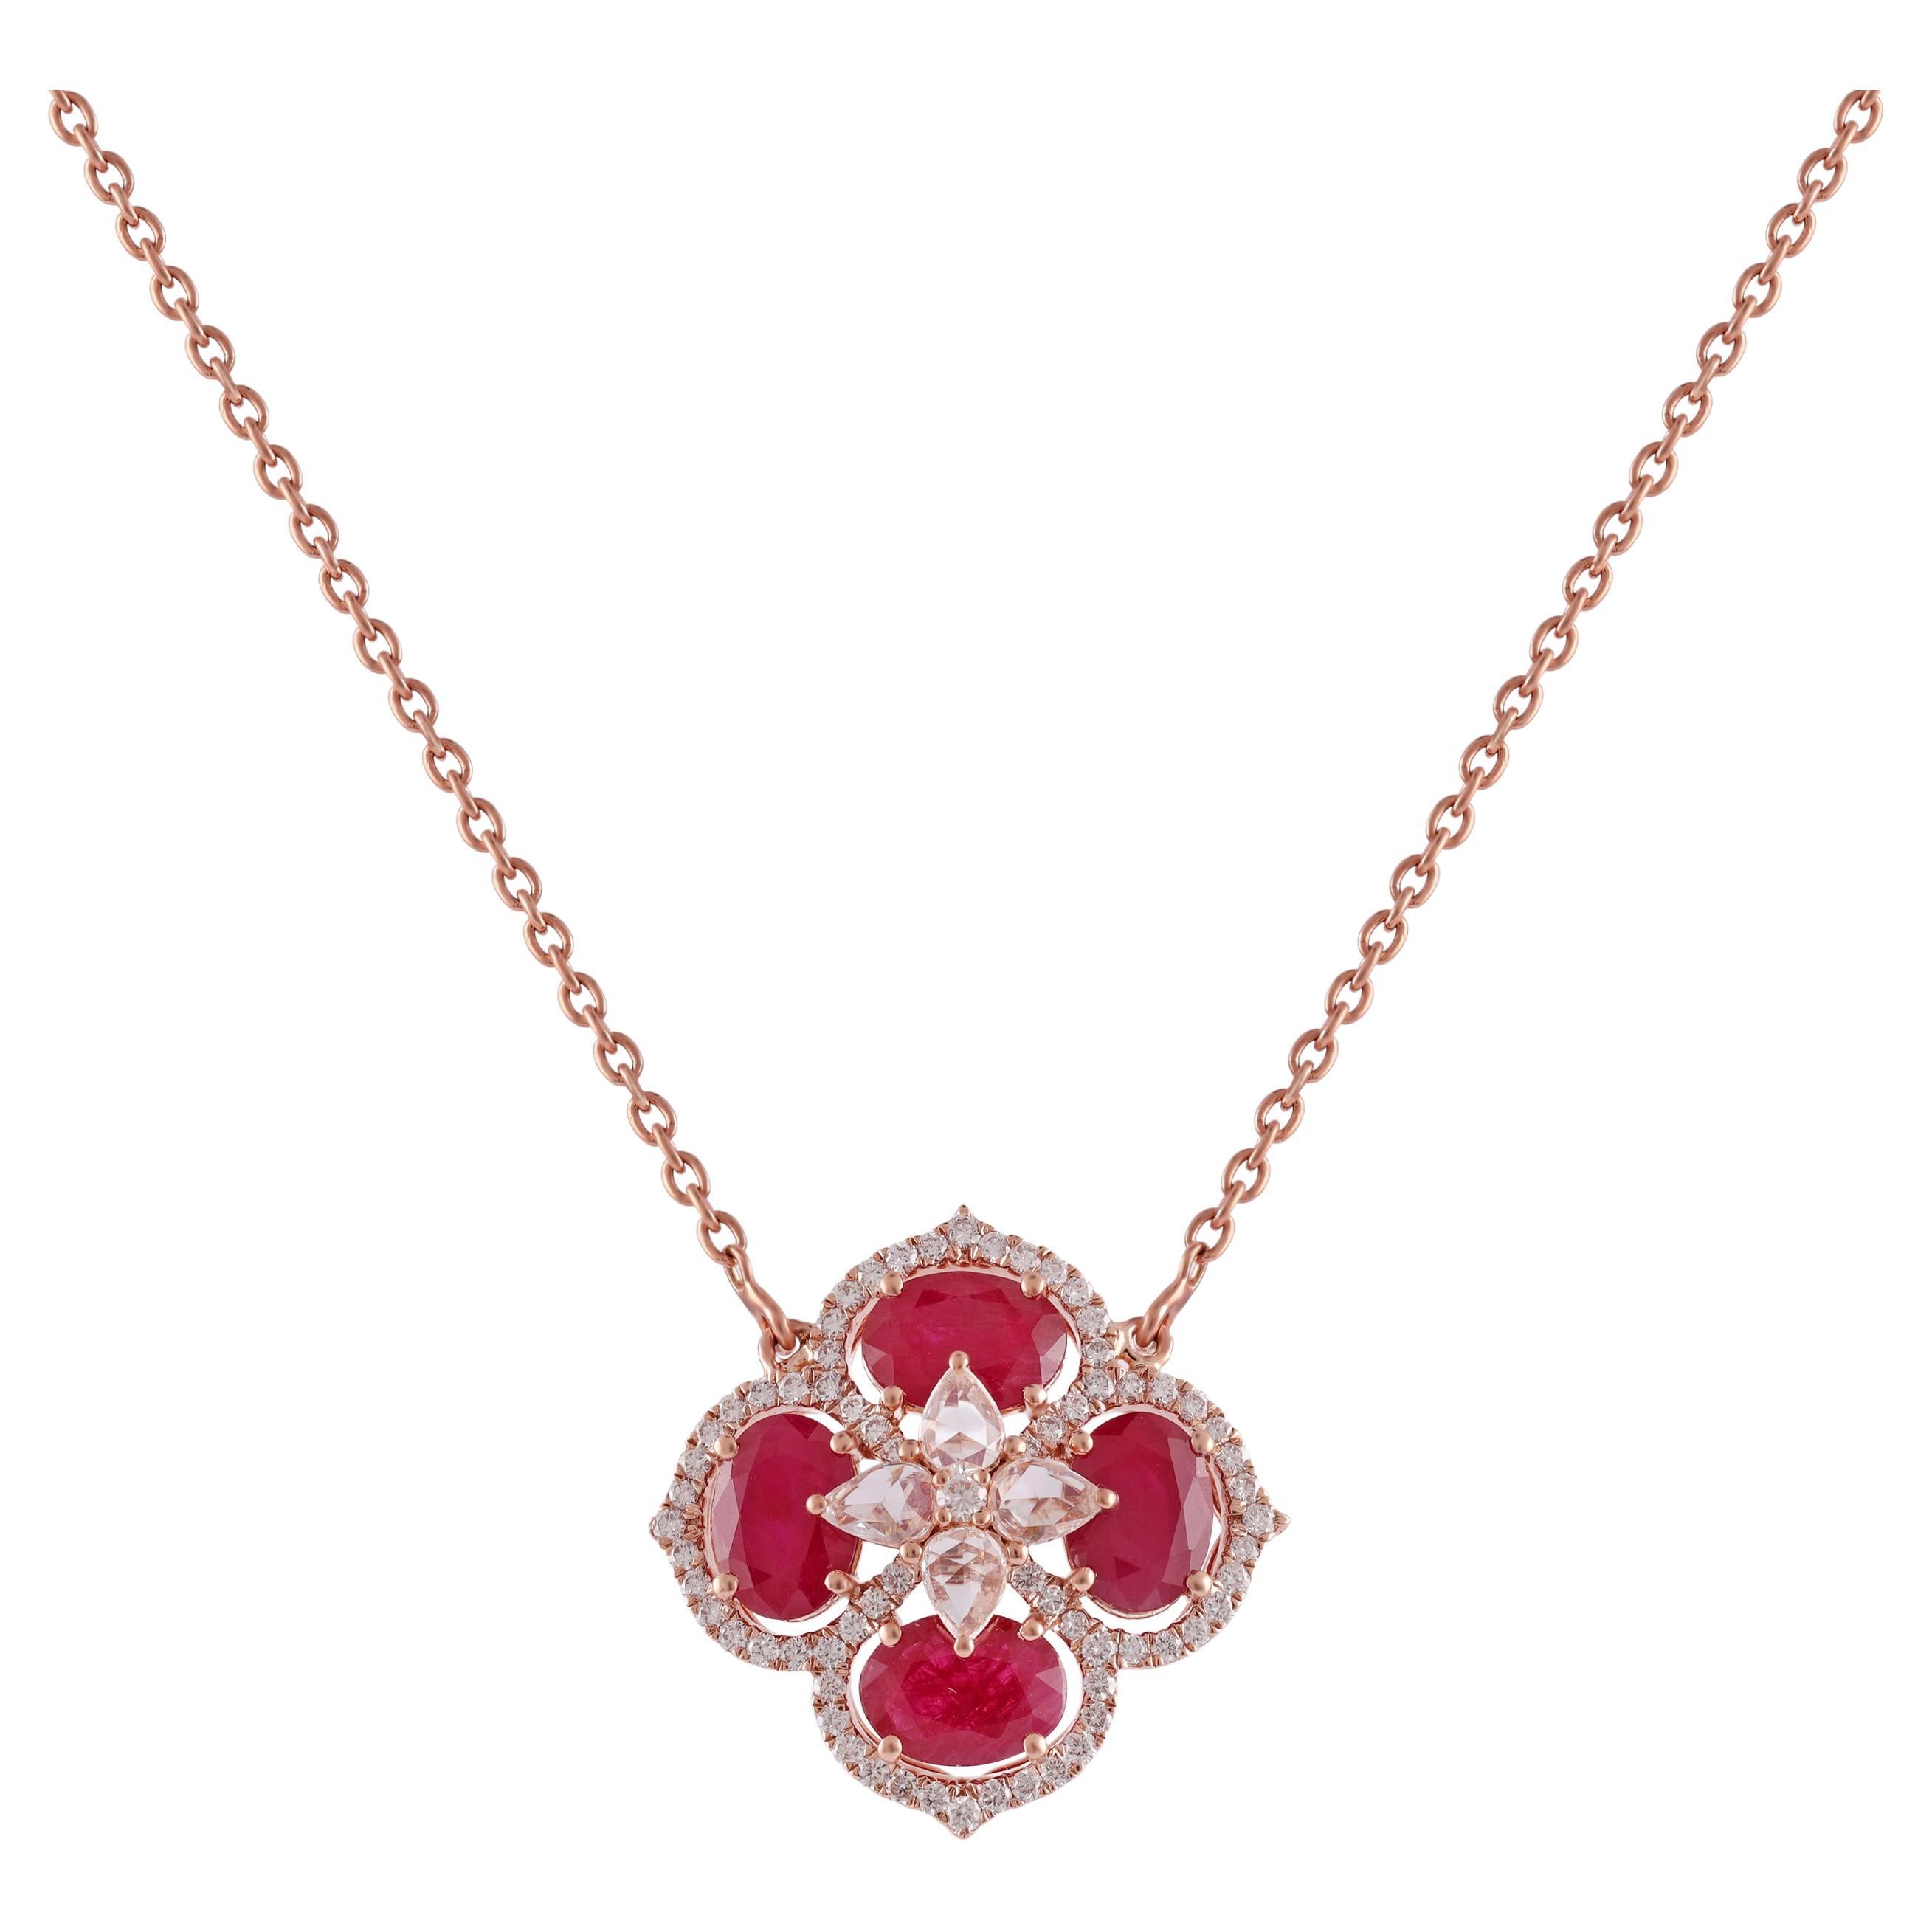  Oval Cut Ruby Pendant Necklace in 18 Karat Gold with Diamond For Sale